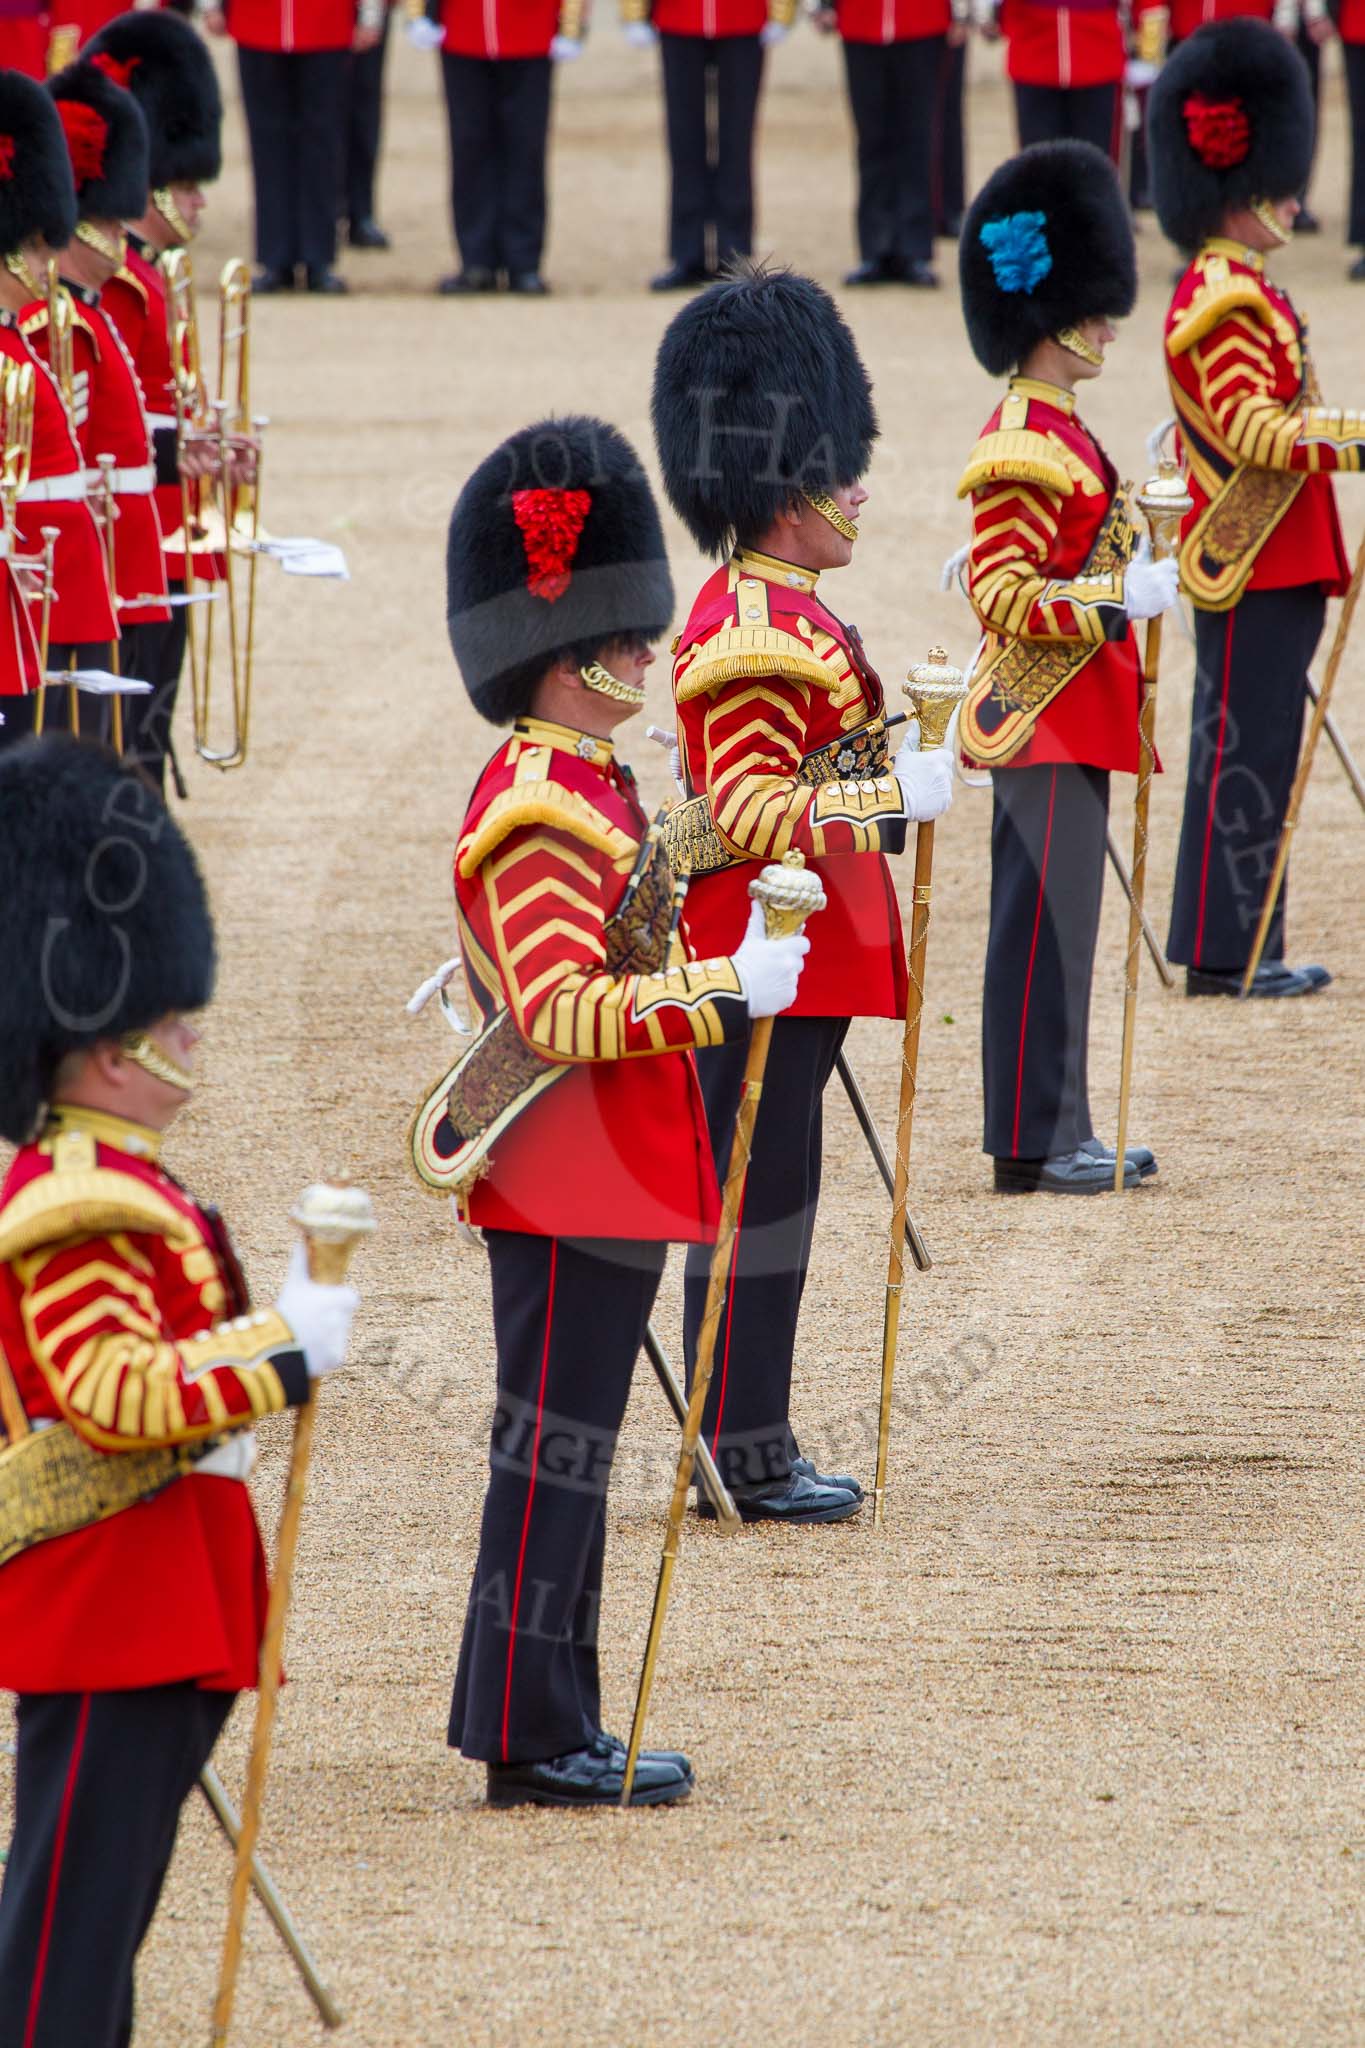 The Colonel's Review 2012: The five Drum Majors on parade, in focus and commanding: Senior Drum Major, M Betts, Grenadier Guards..
Horse Guards Parade, Westminster,
London SW1,

United Kingdom,
on 09 June 2012 at 11:50, image #380